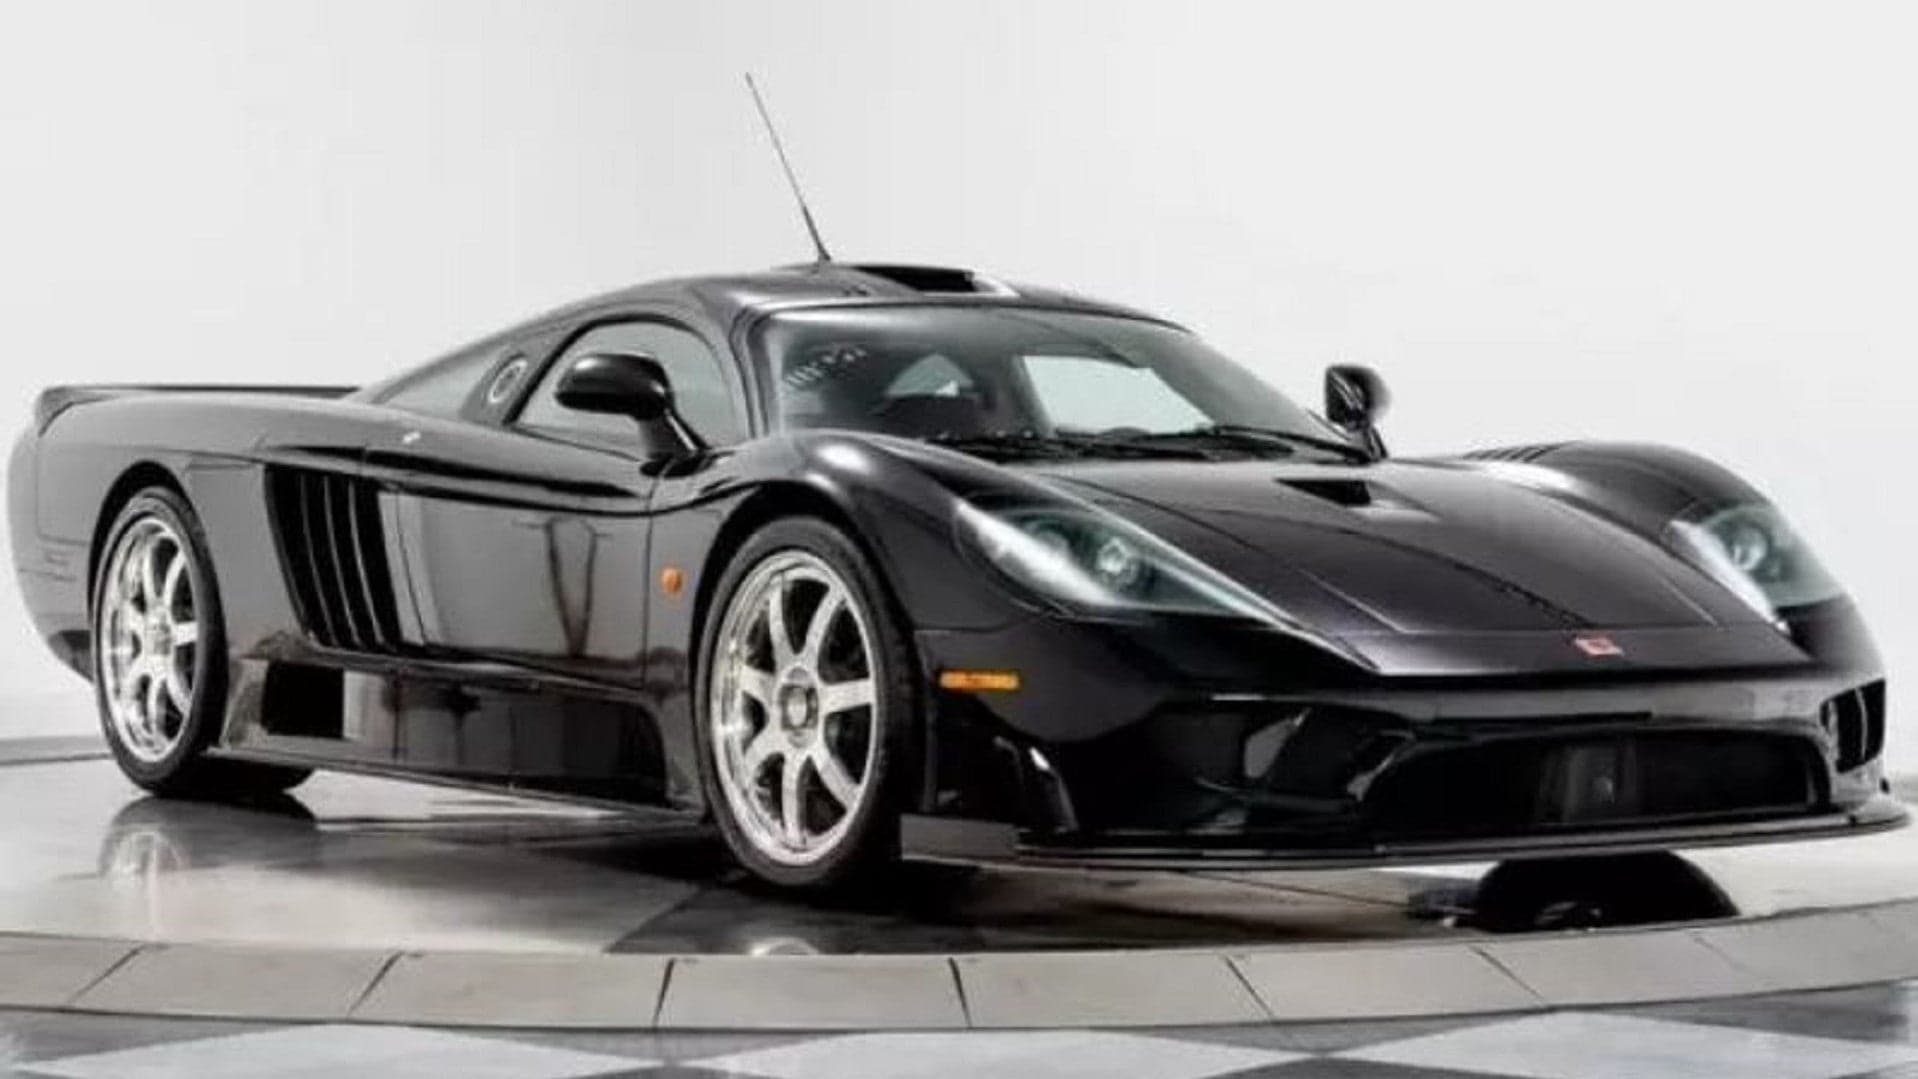 This 2005 Saleen S7 Twin Turbo Can Get You to 248 MPH for Just $799,990